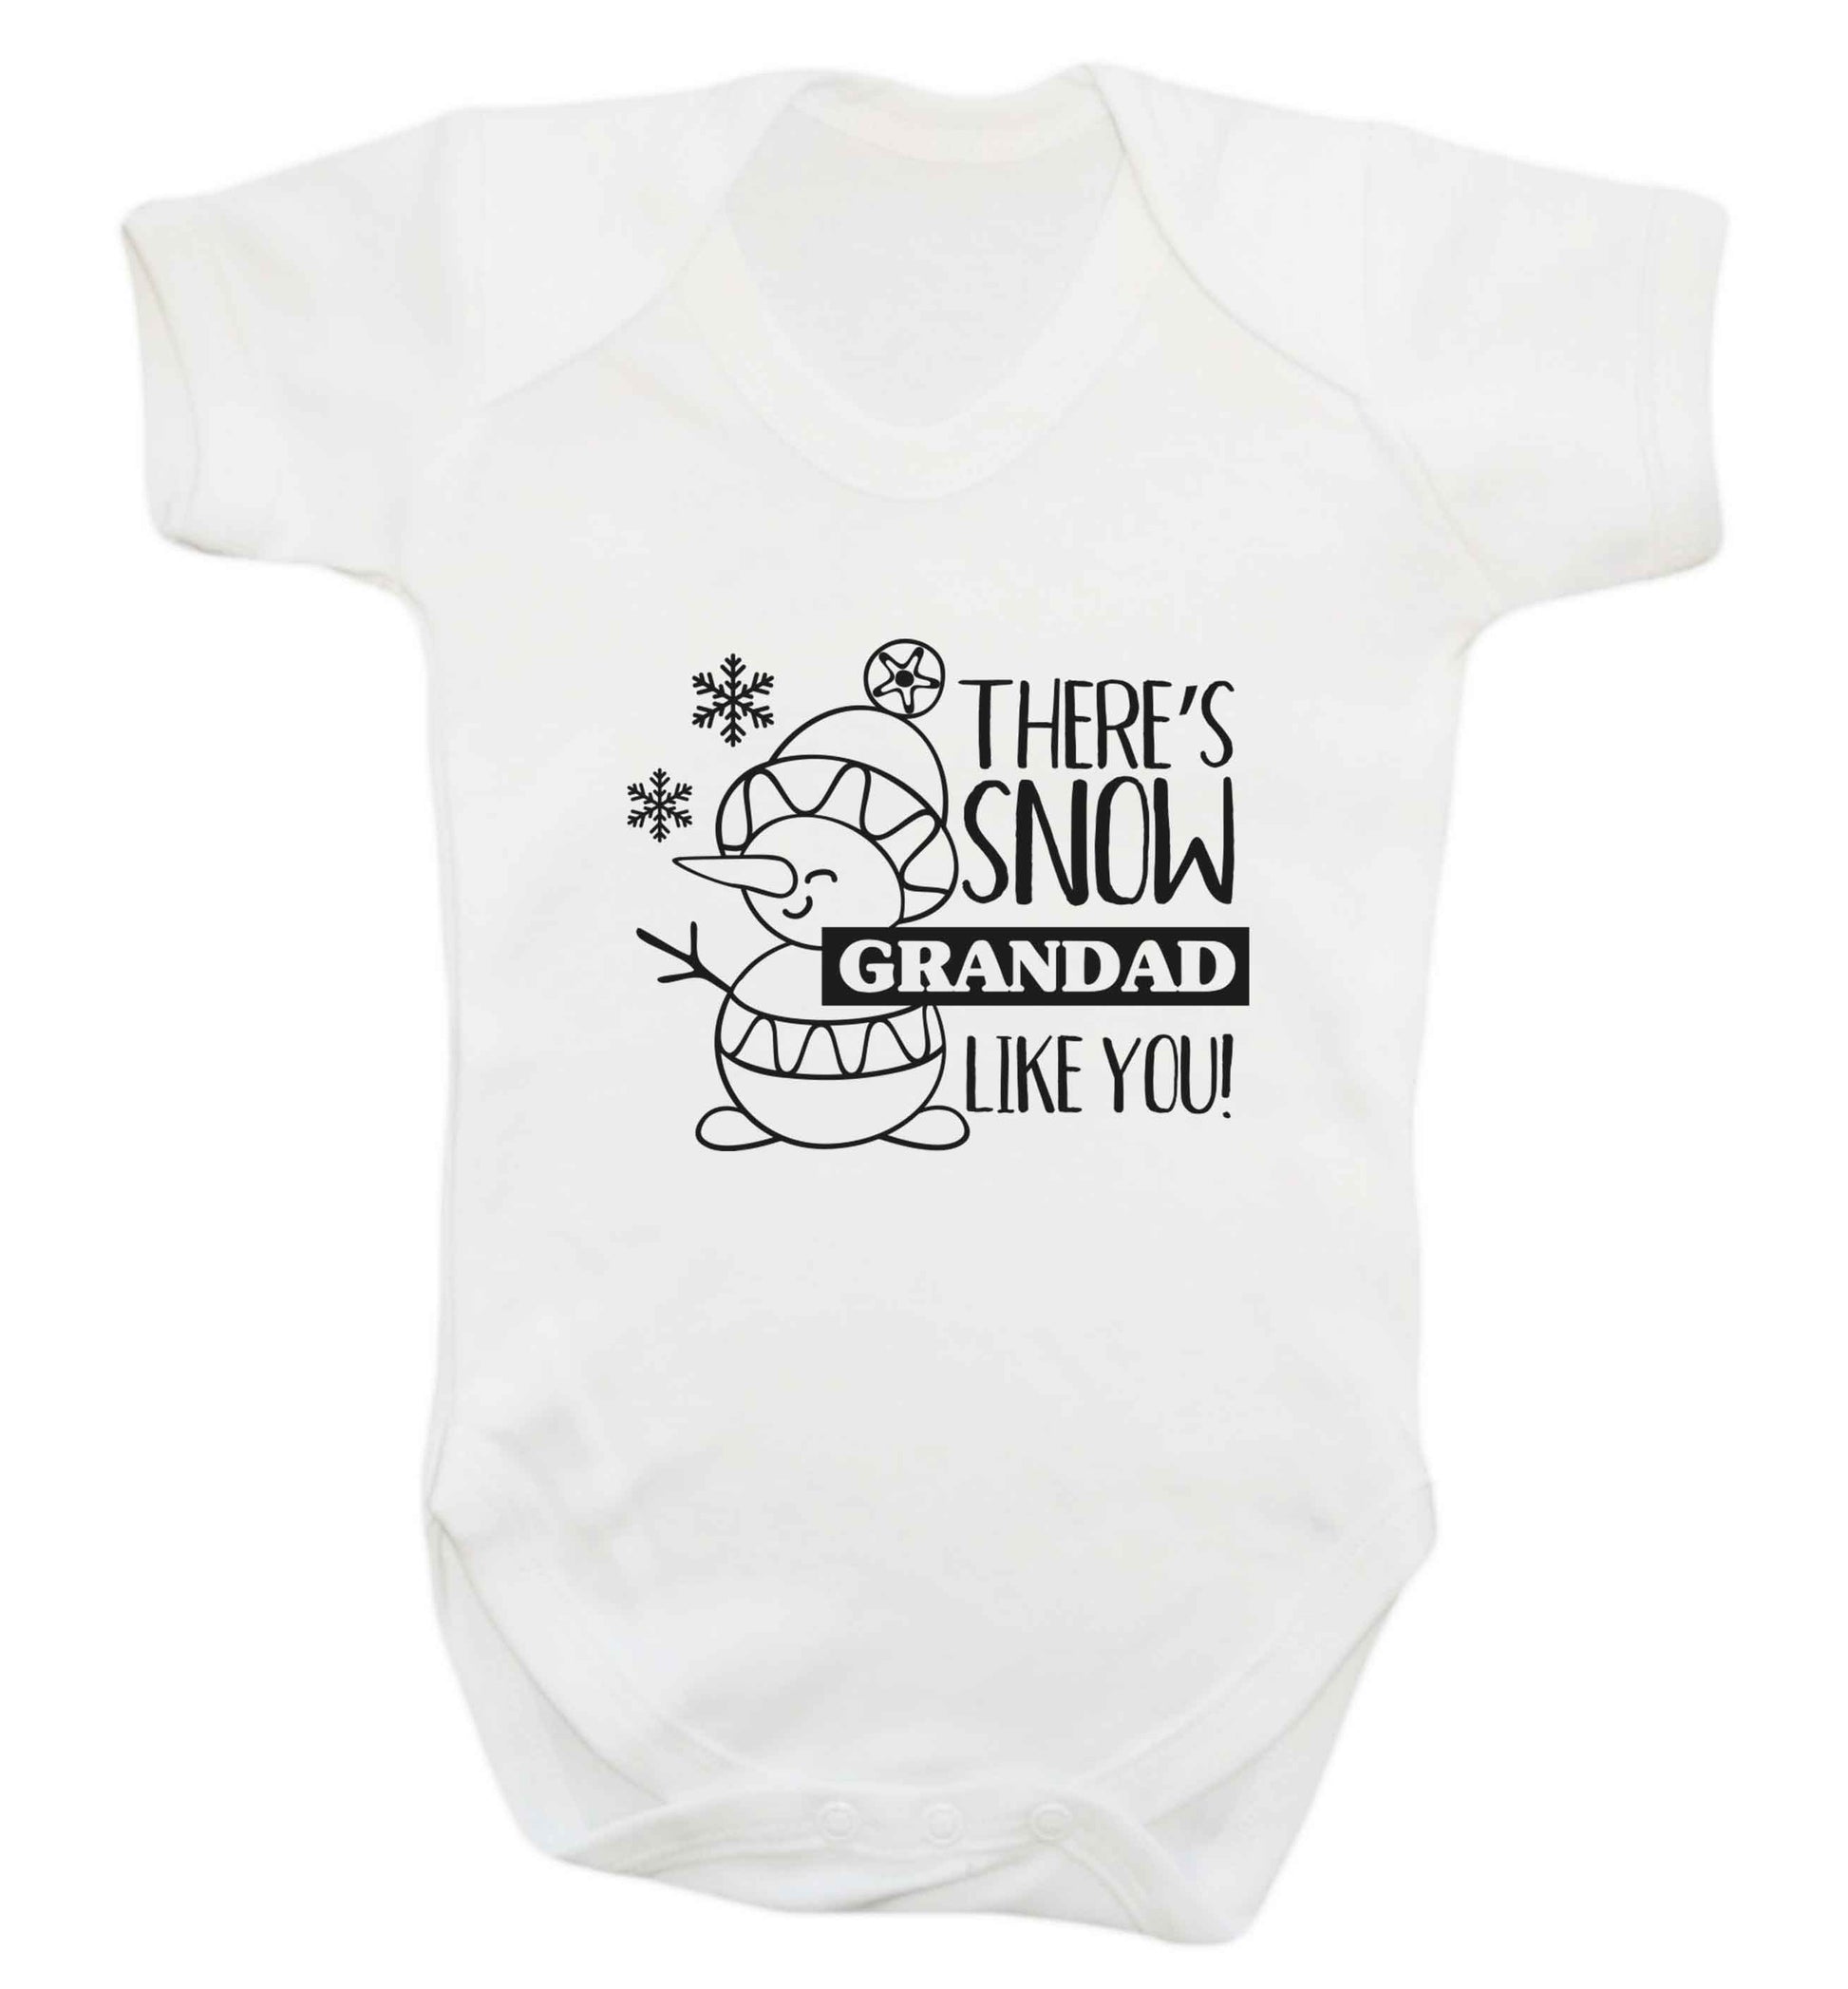 There's snow grandad like you baby vest white 18-24 months